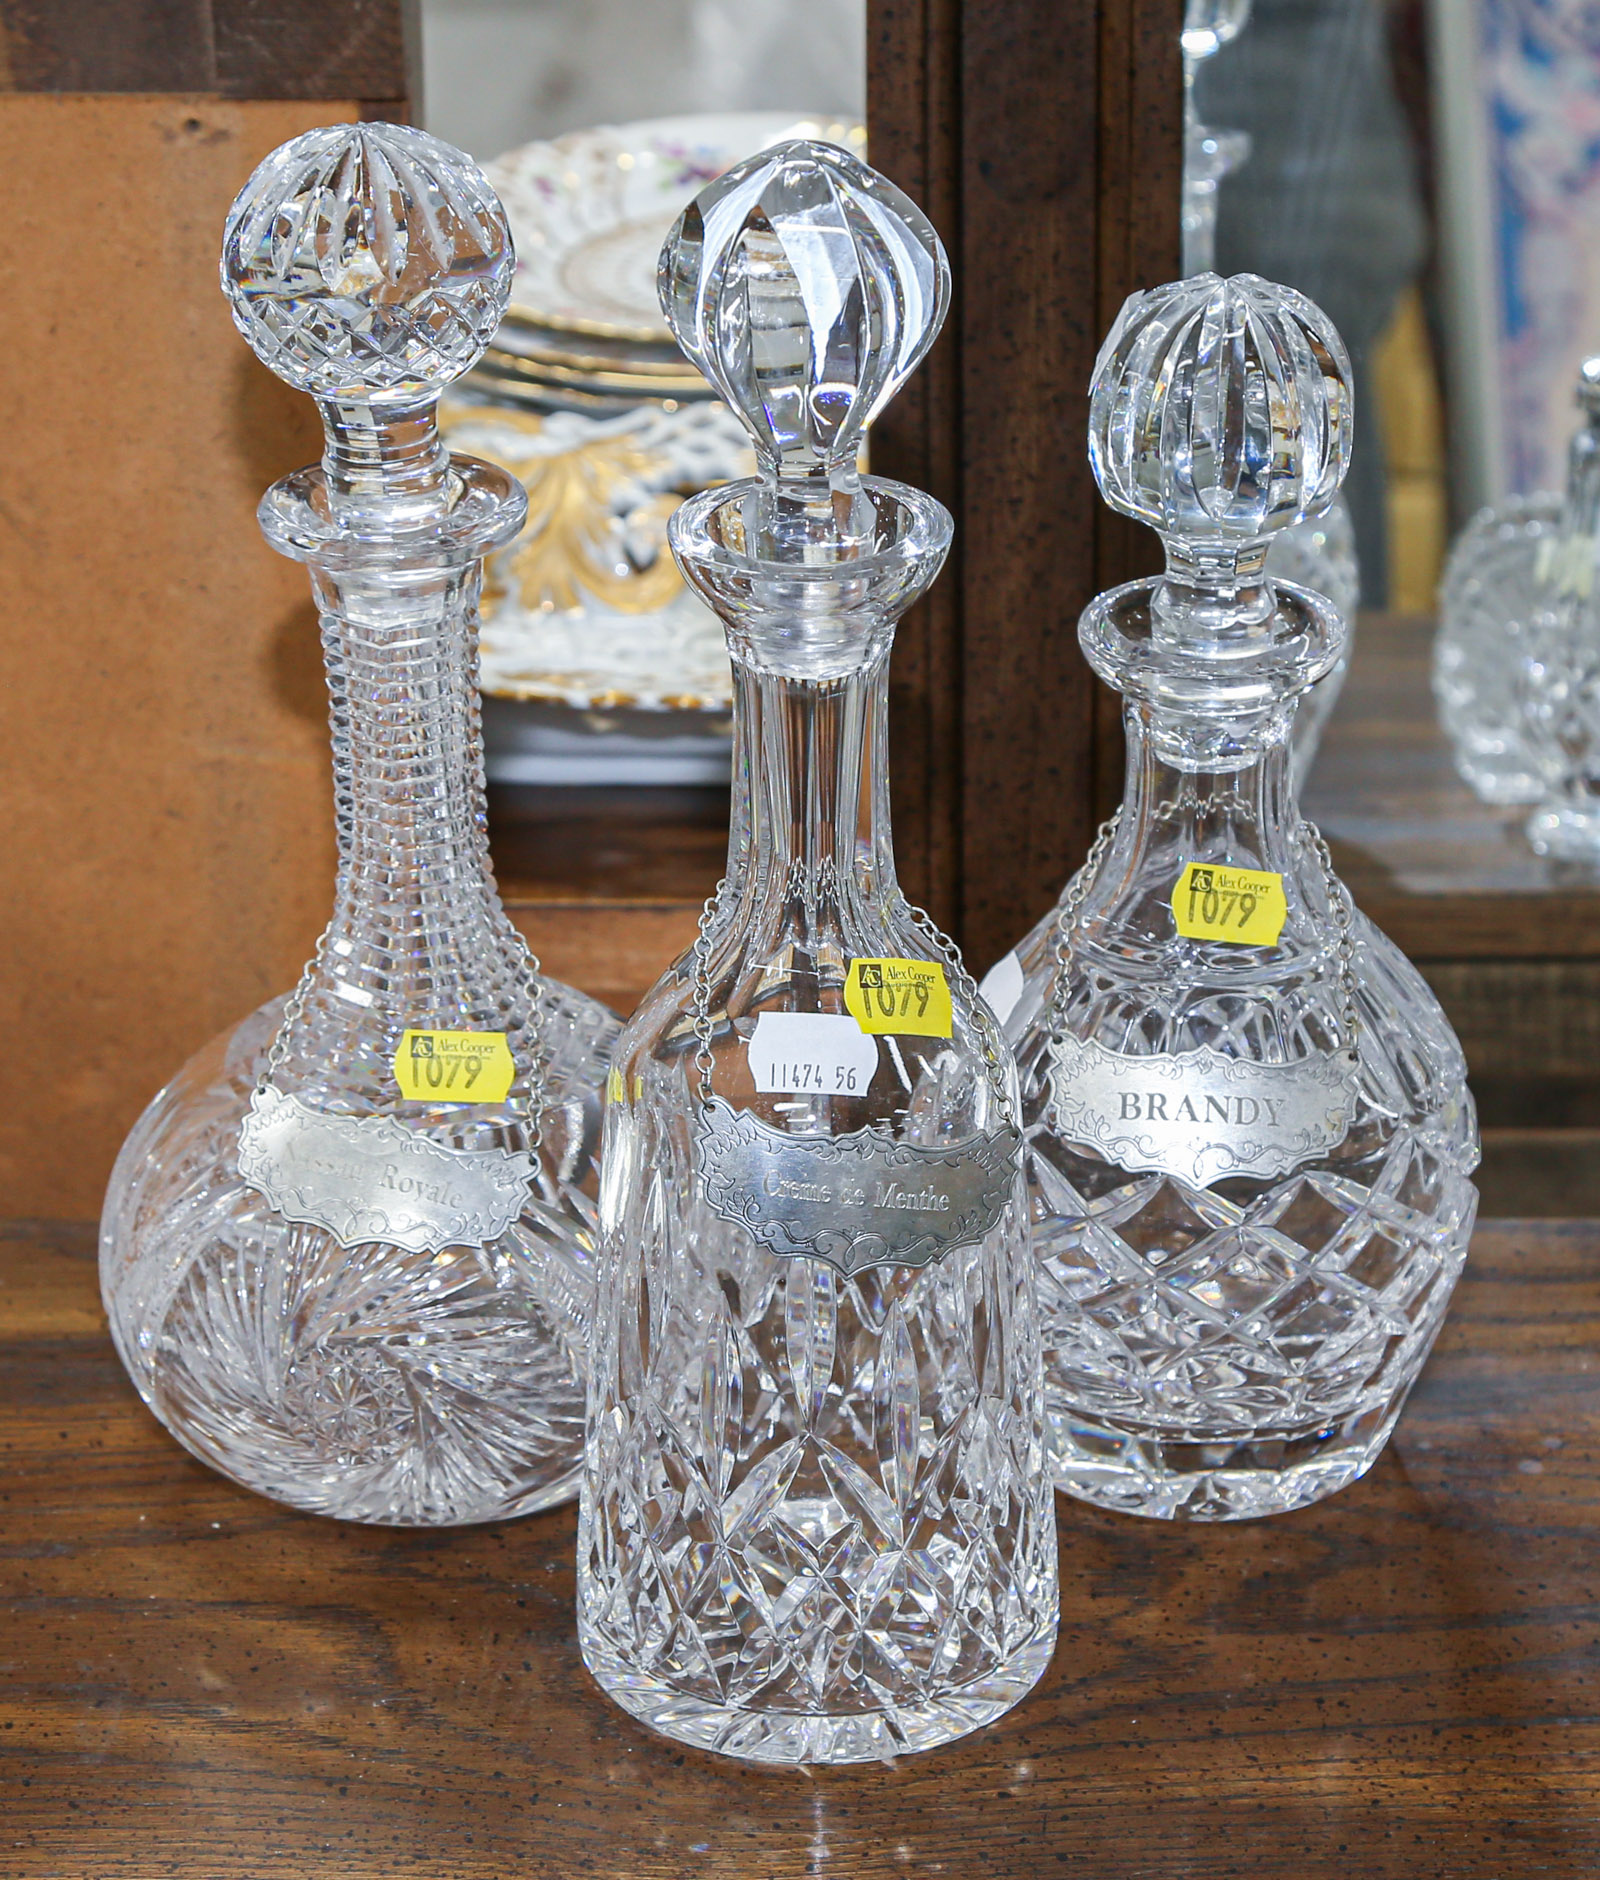 THREE WATERFORD DECANTERS 11 to 36a3d6